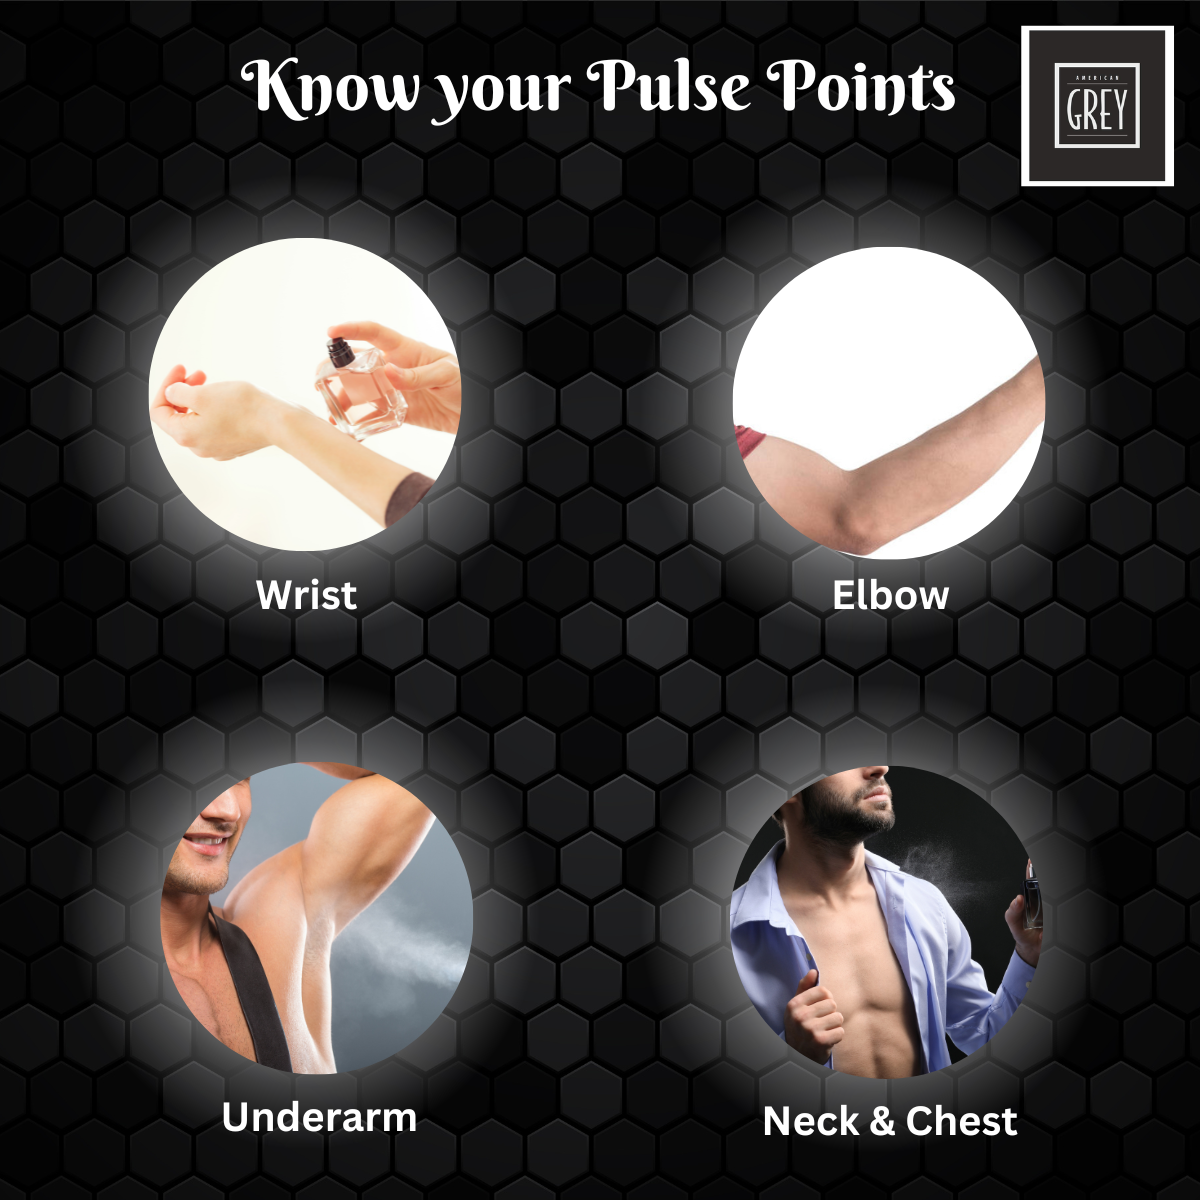 know your pulse points, pulse points, american grey signature code deo, deo spray for men, deo spray for him, what are the pulse points to apply deodorant for men, men deodorant, deodorant spray for men, what are the pulse points for perfume male?, what is the best way to apply perfume for men?, where are male pulse points, deodorant tips for men, deodorant tips for male in india, perfume pulse points myths, best pulse points for perfume male, top rated men deo, men grooming essential, men fragrance for winter season, best deo for cold weather, popular winter deodorant for men, best smelling deo for winter season, best evening wear for men